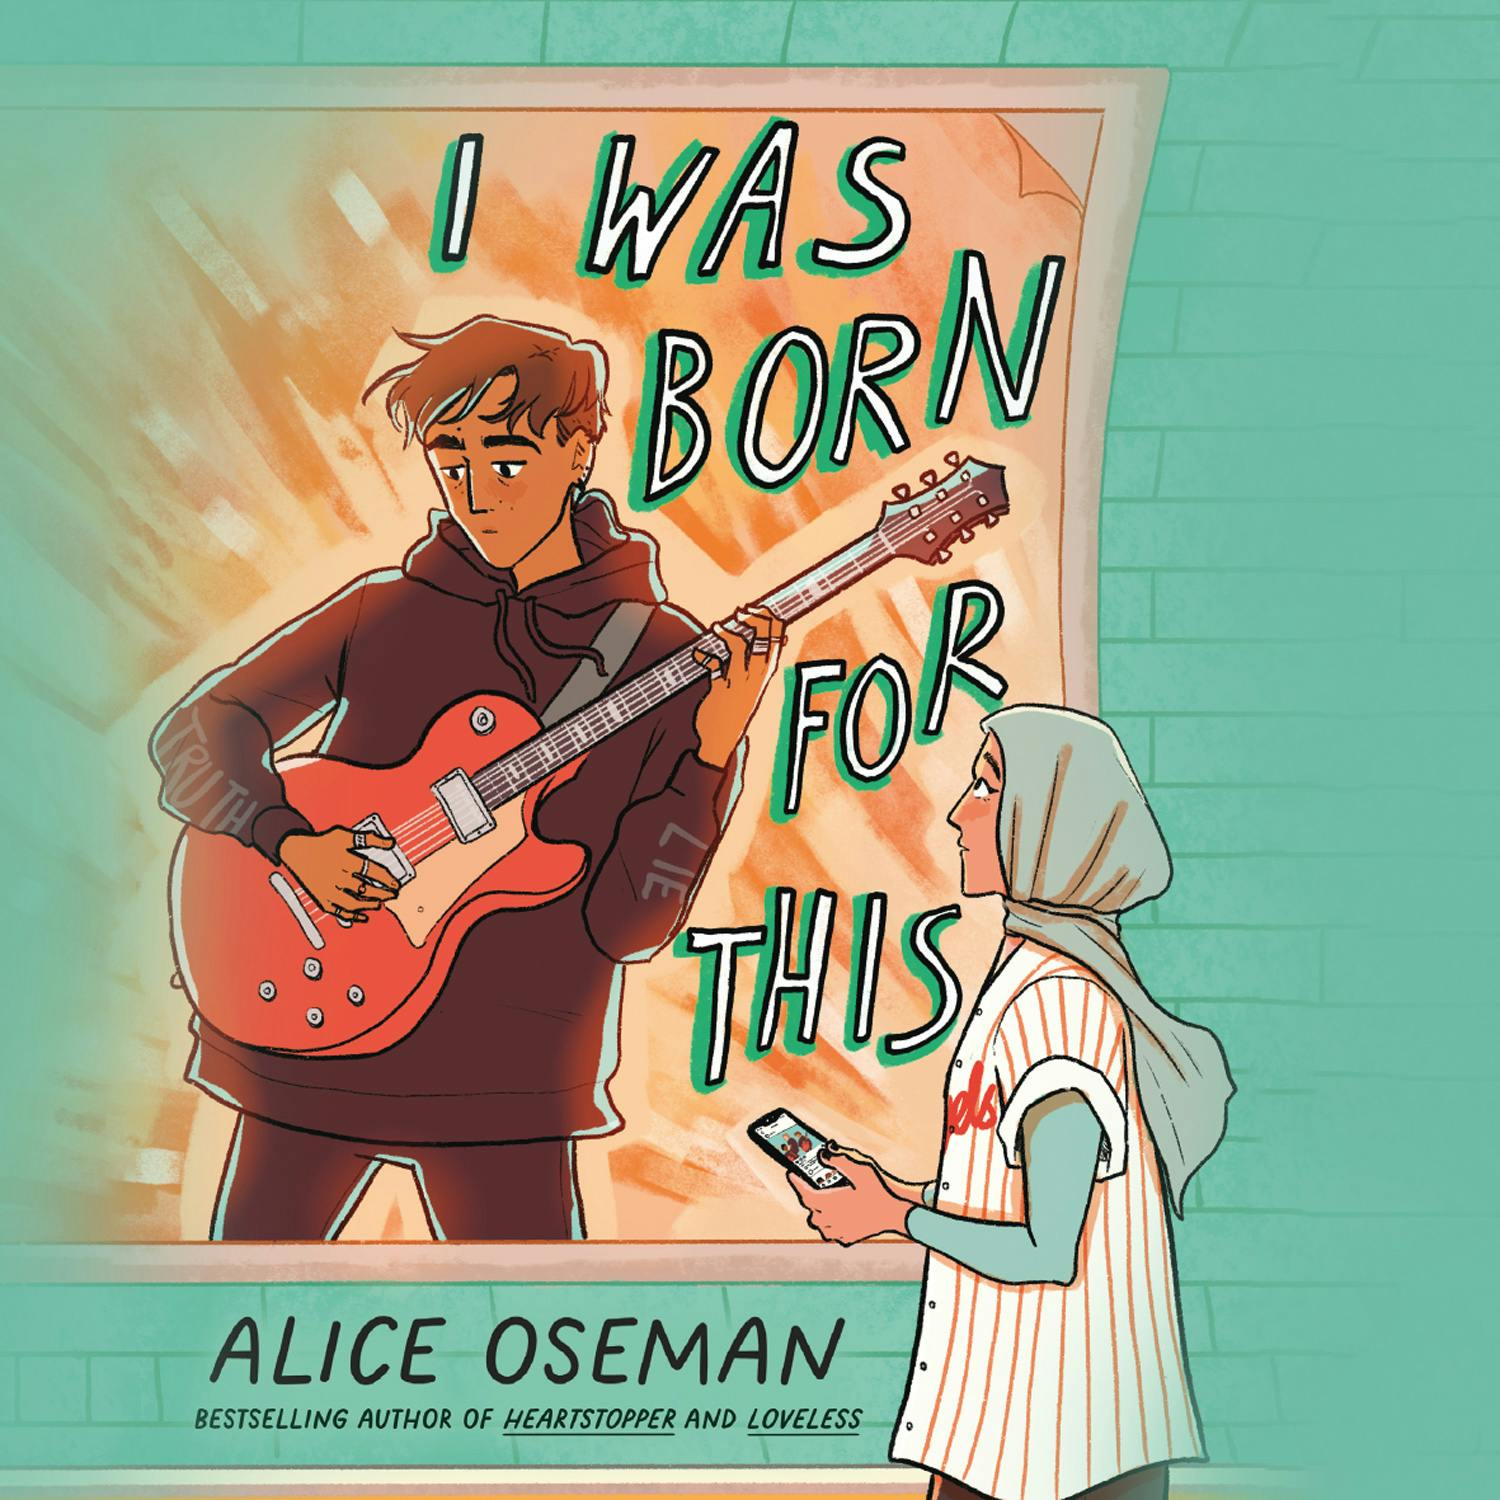 I Was Born for This - Alice Oseman